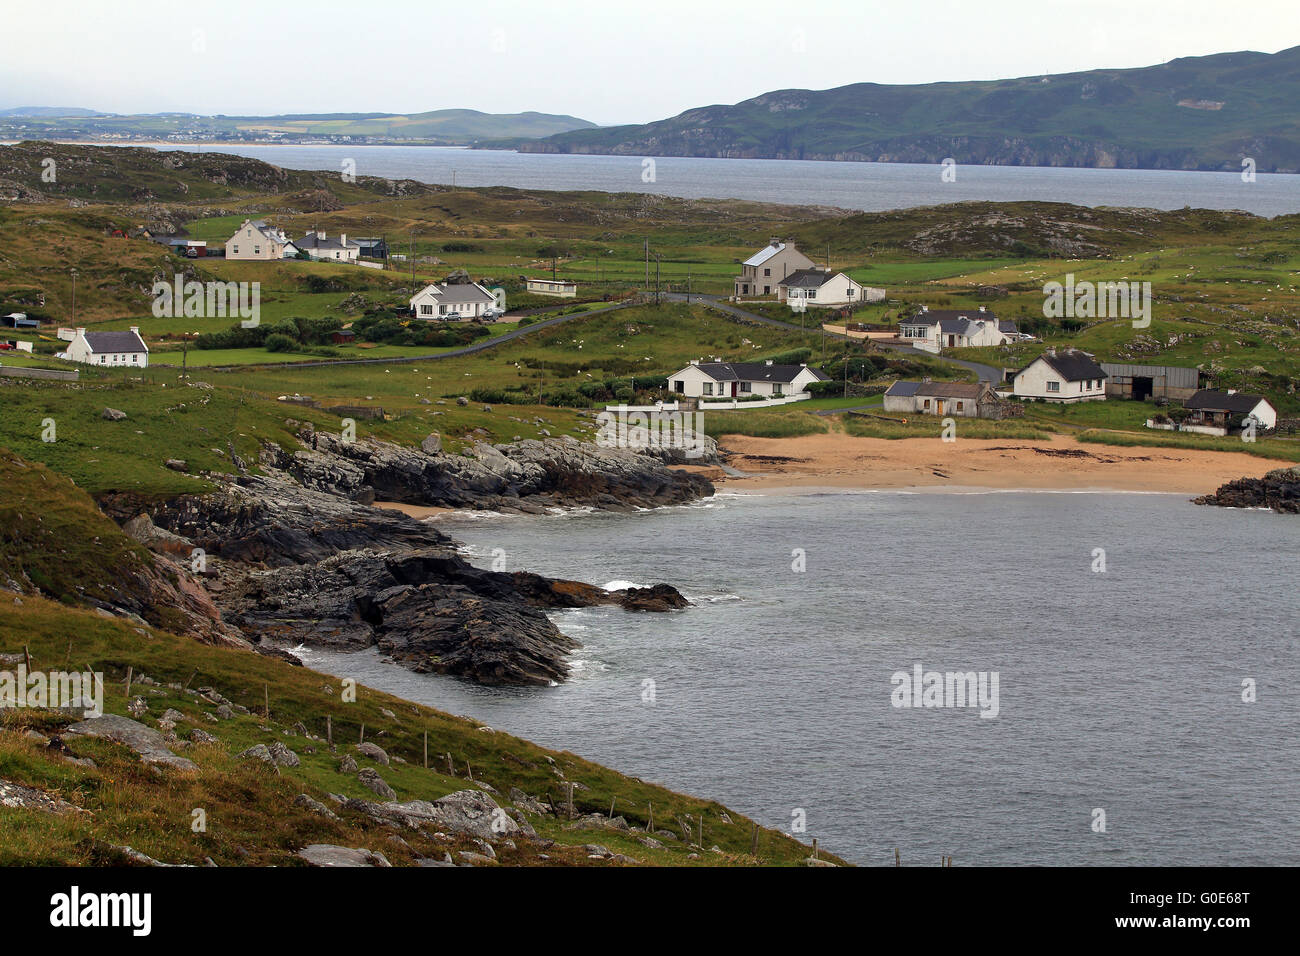 Dorf Doagh, Nord Küste County Donegal, Irland Stockfoto